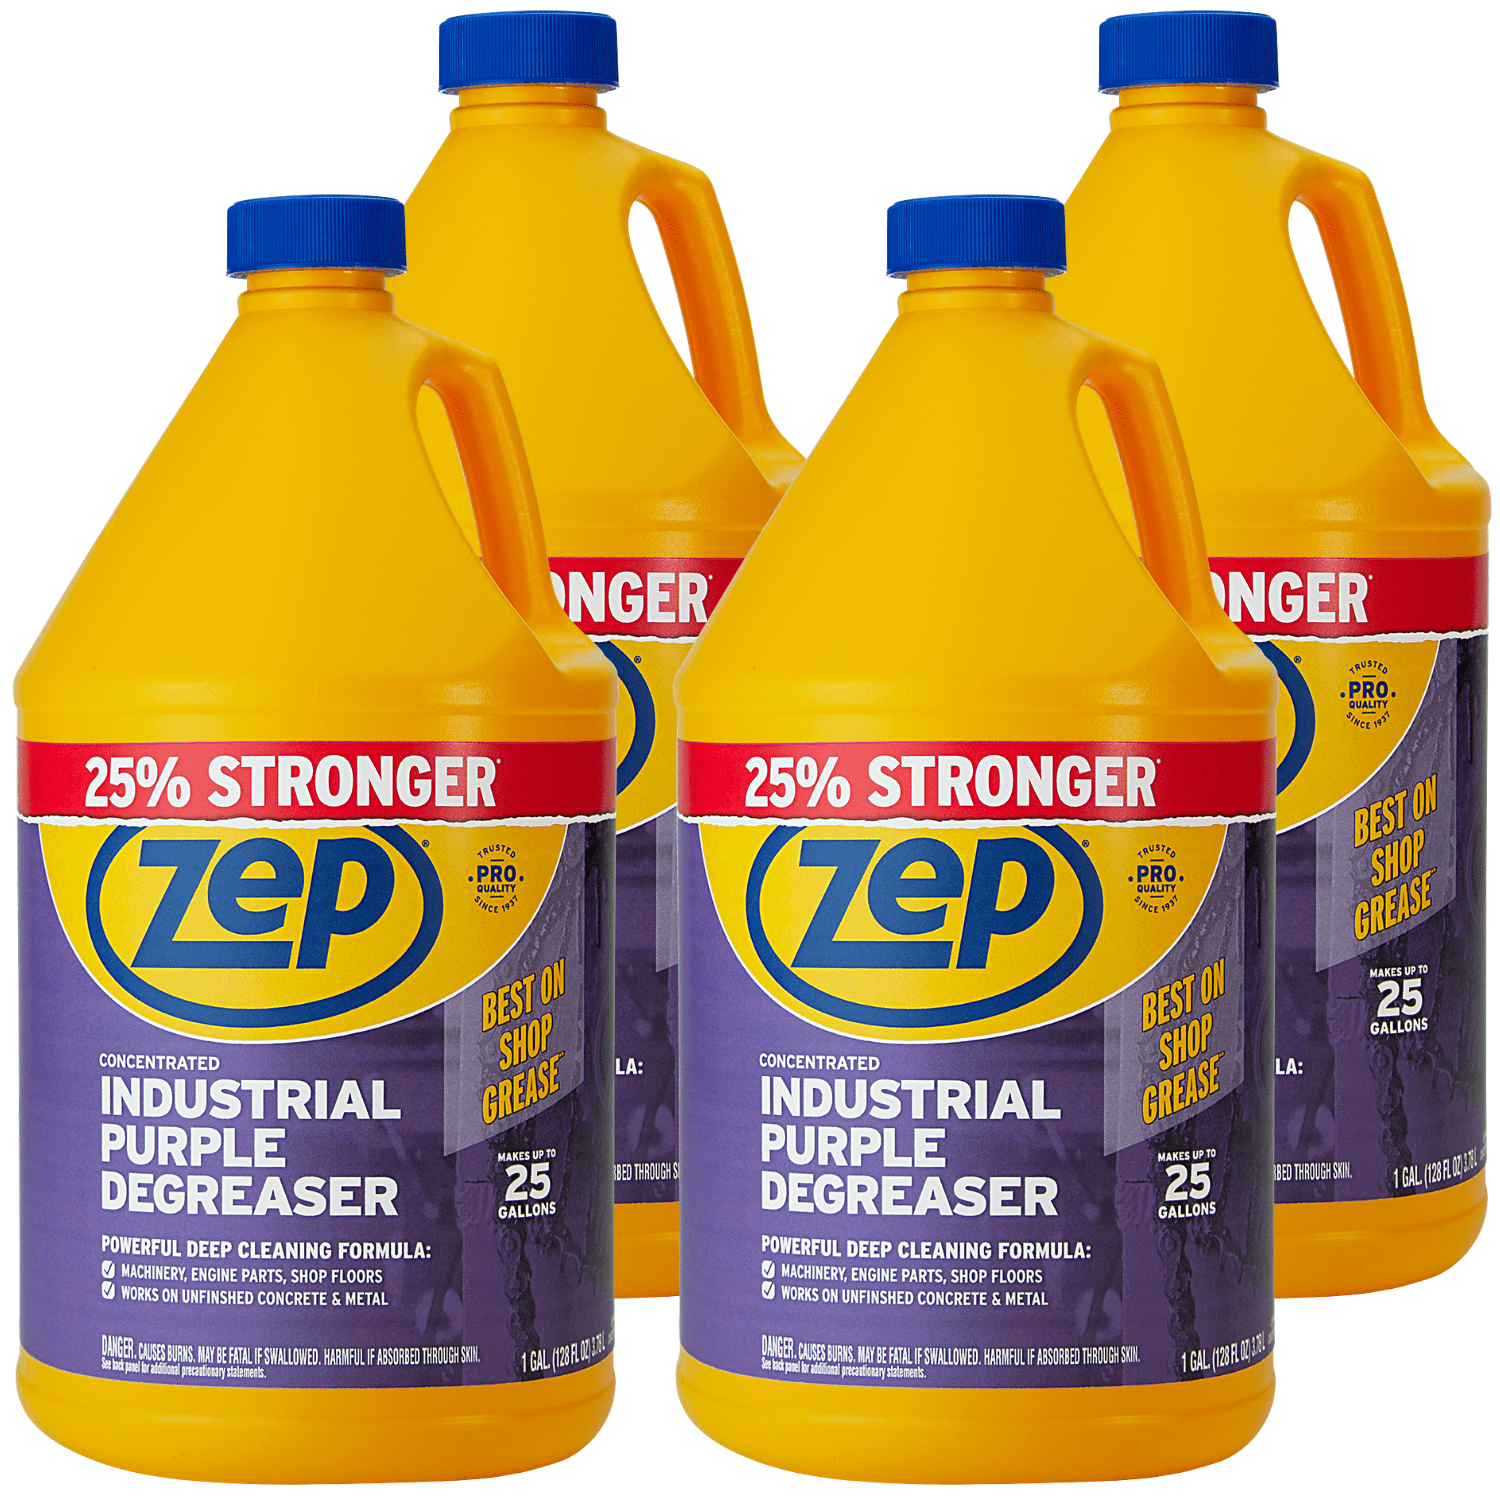 Zep All-Purpose Cleaner and Degreaser Concentrate - 1 Gal (Case of